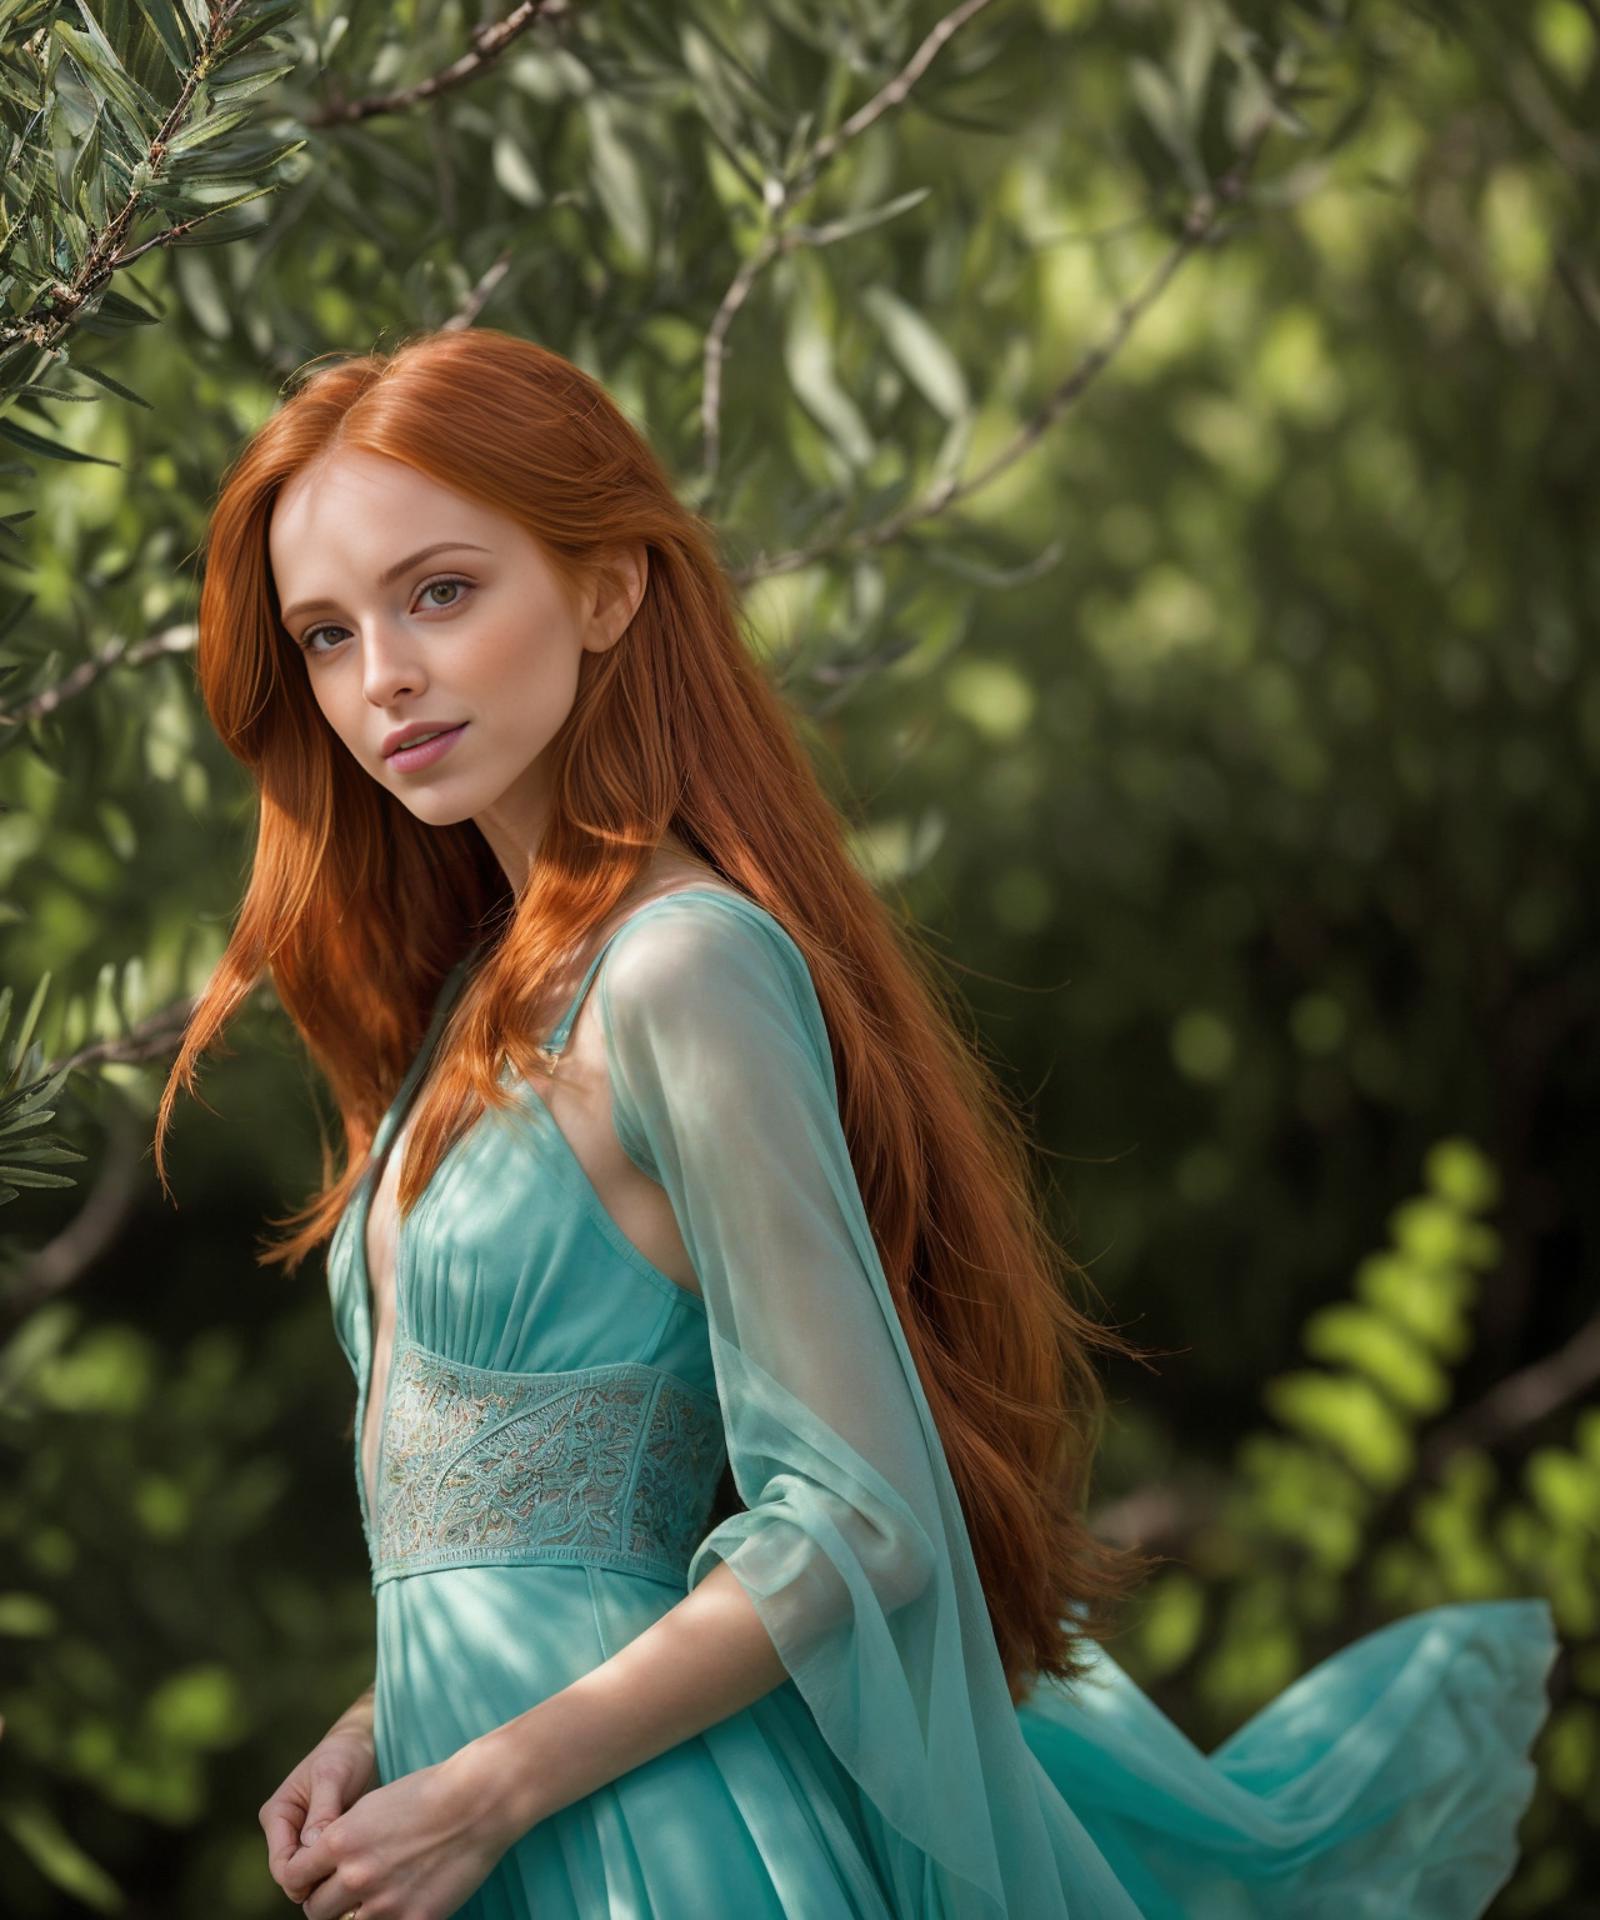 A young woman with red hair and a flowing blue dress, posing in the woods.